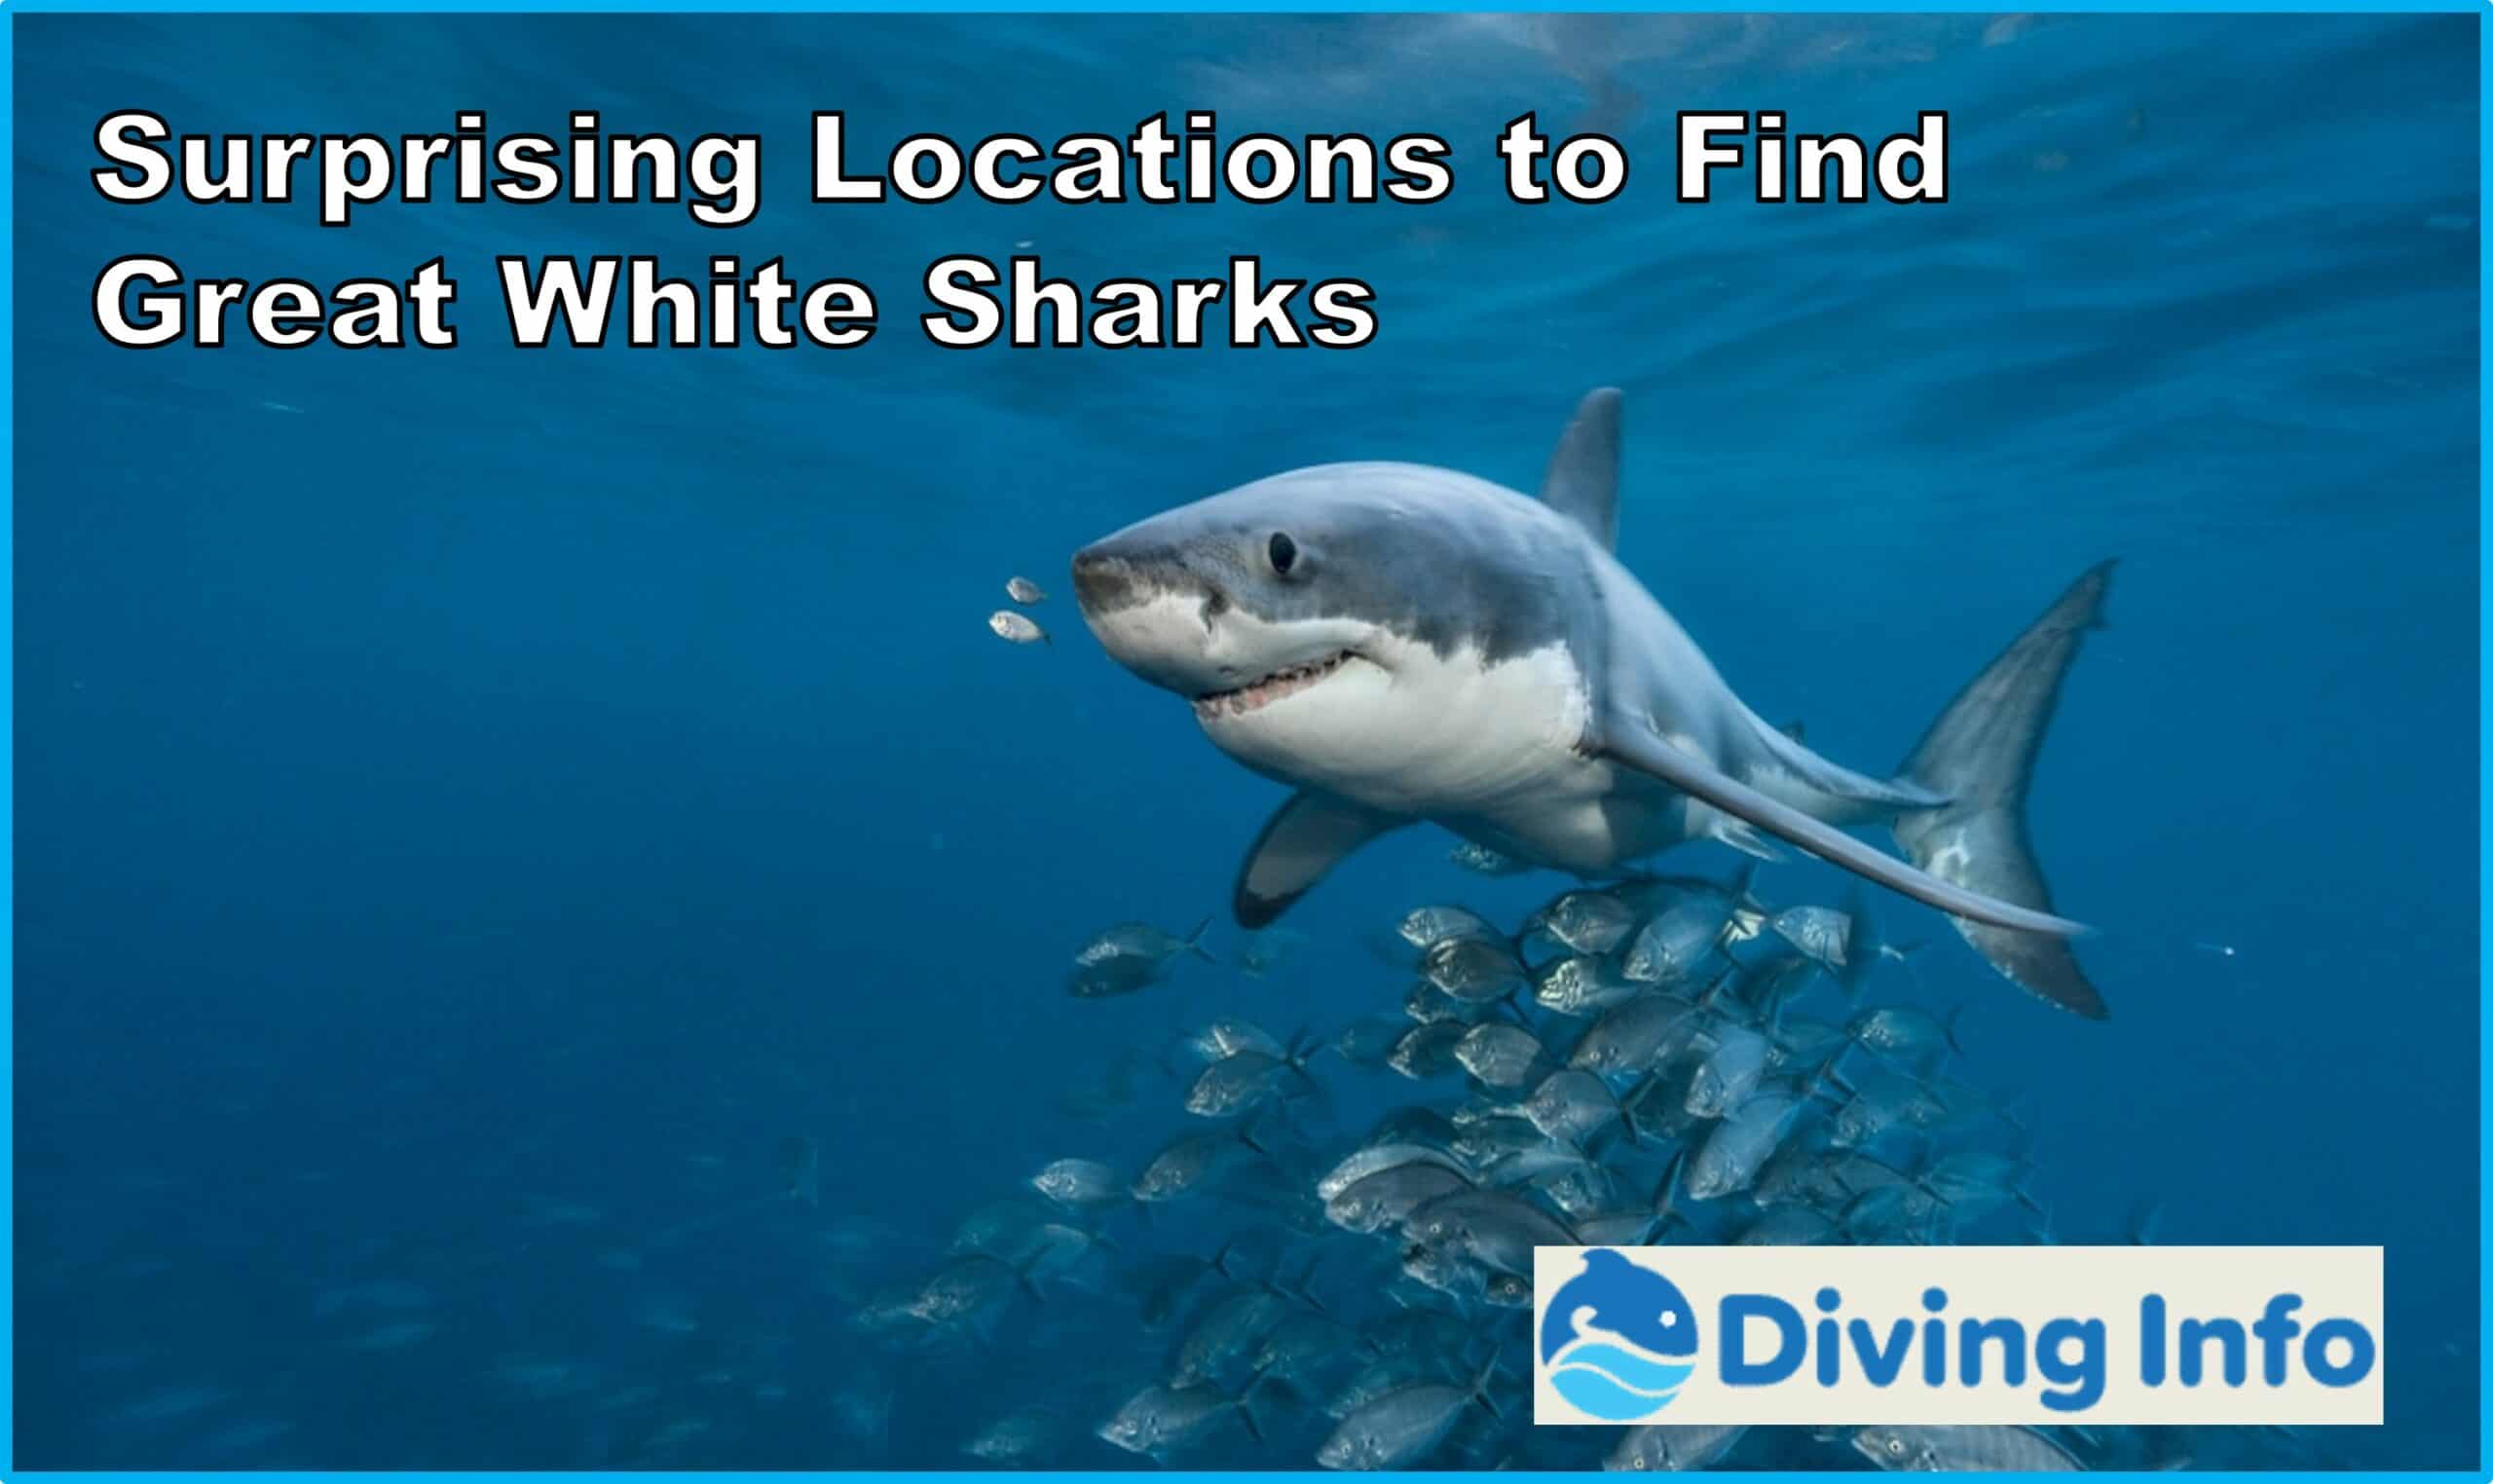 Surprising Locations to Find Great White Sharks